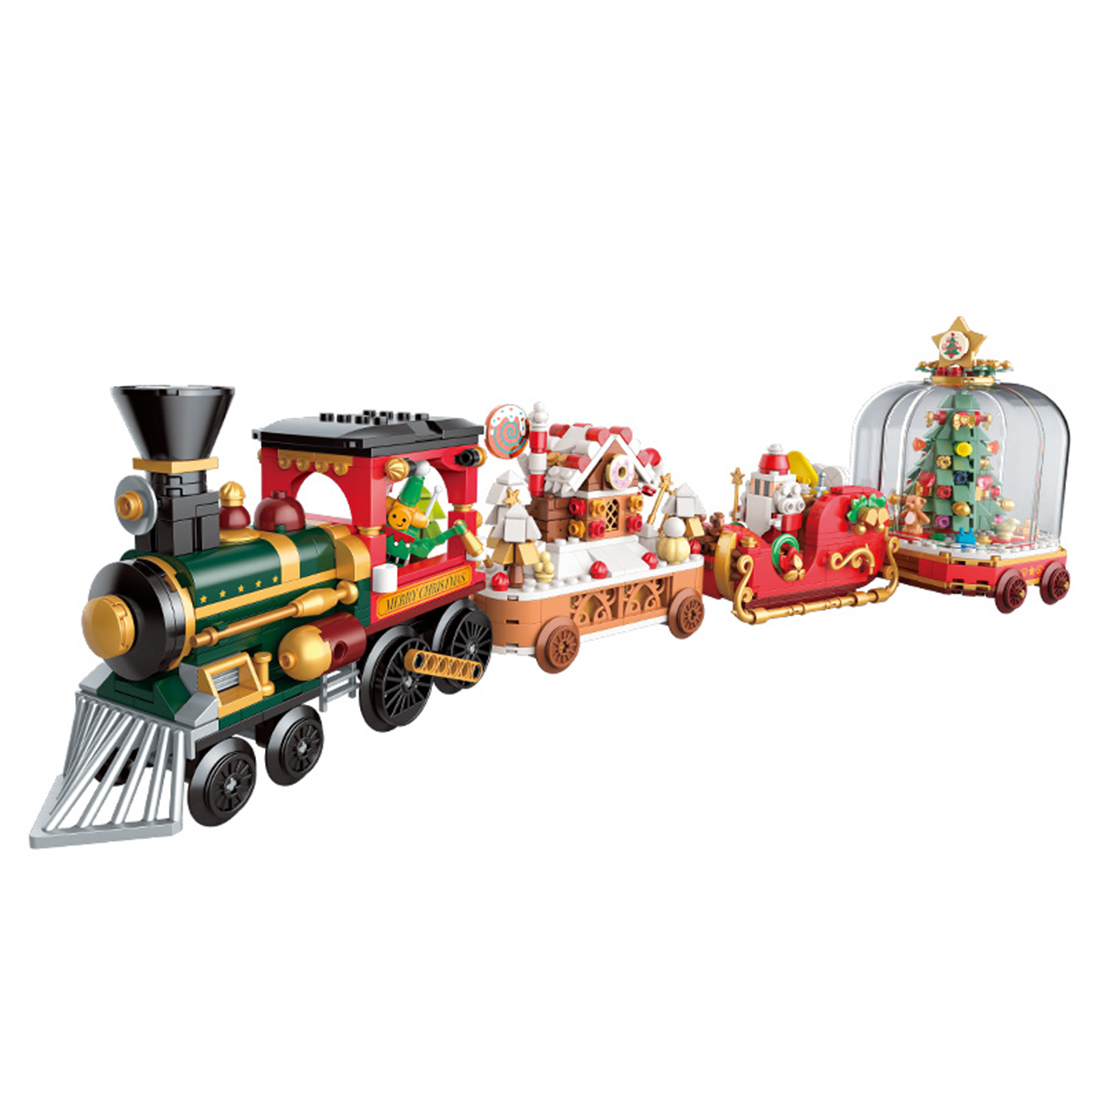 MOC DIY Christmas Colourful Train Model Assembly Toy Small Particles Building Blocks Set (1000PCS/Set of 4)